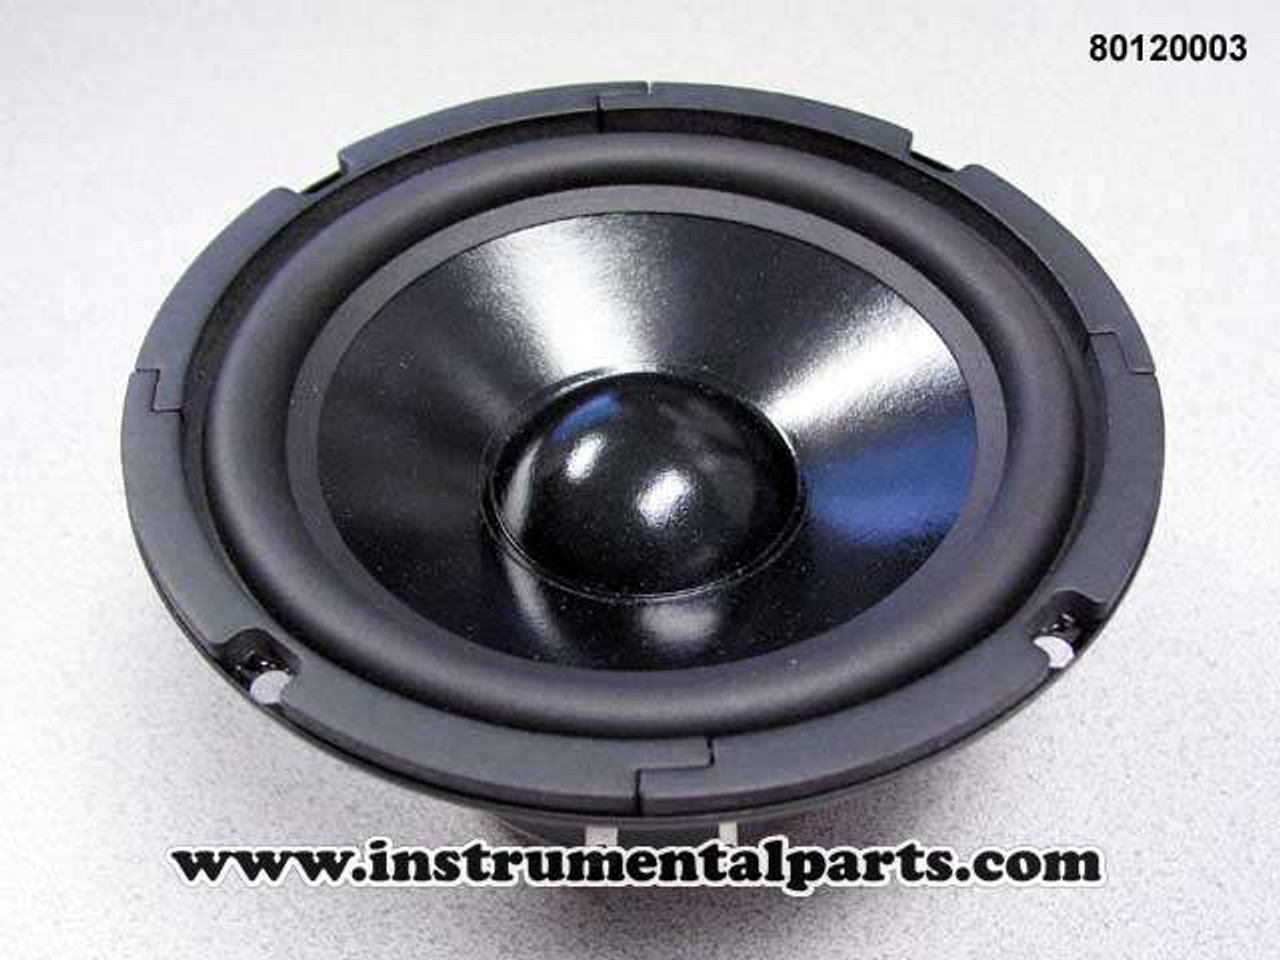 anden talsmand Indsprøjtning Replacement Woofer 6.5" - Pro Active 2.0 - ALL ALESIS SPARE PARTS - 80120003